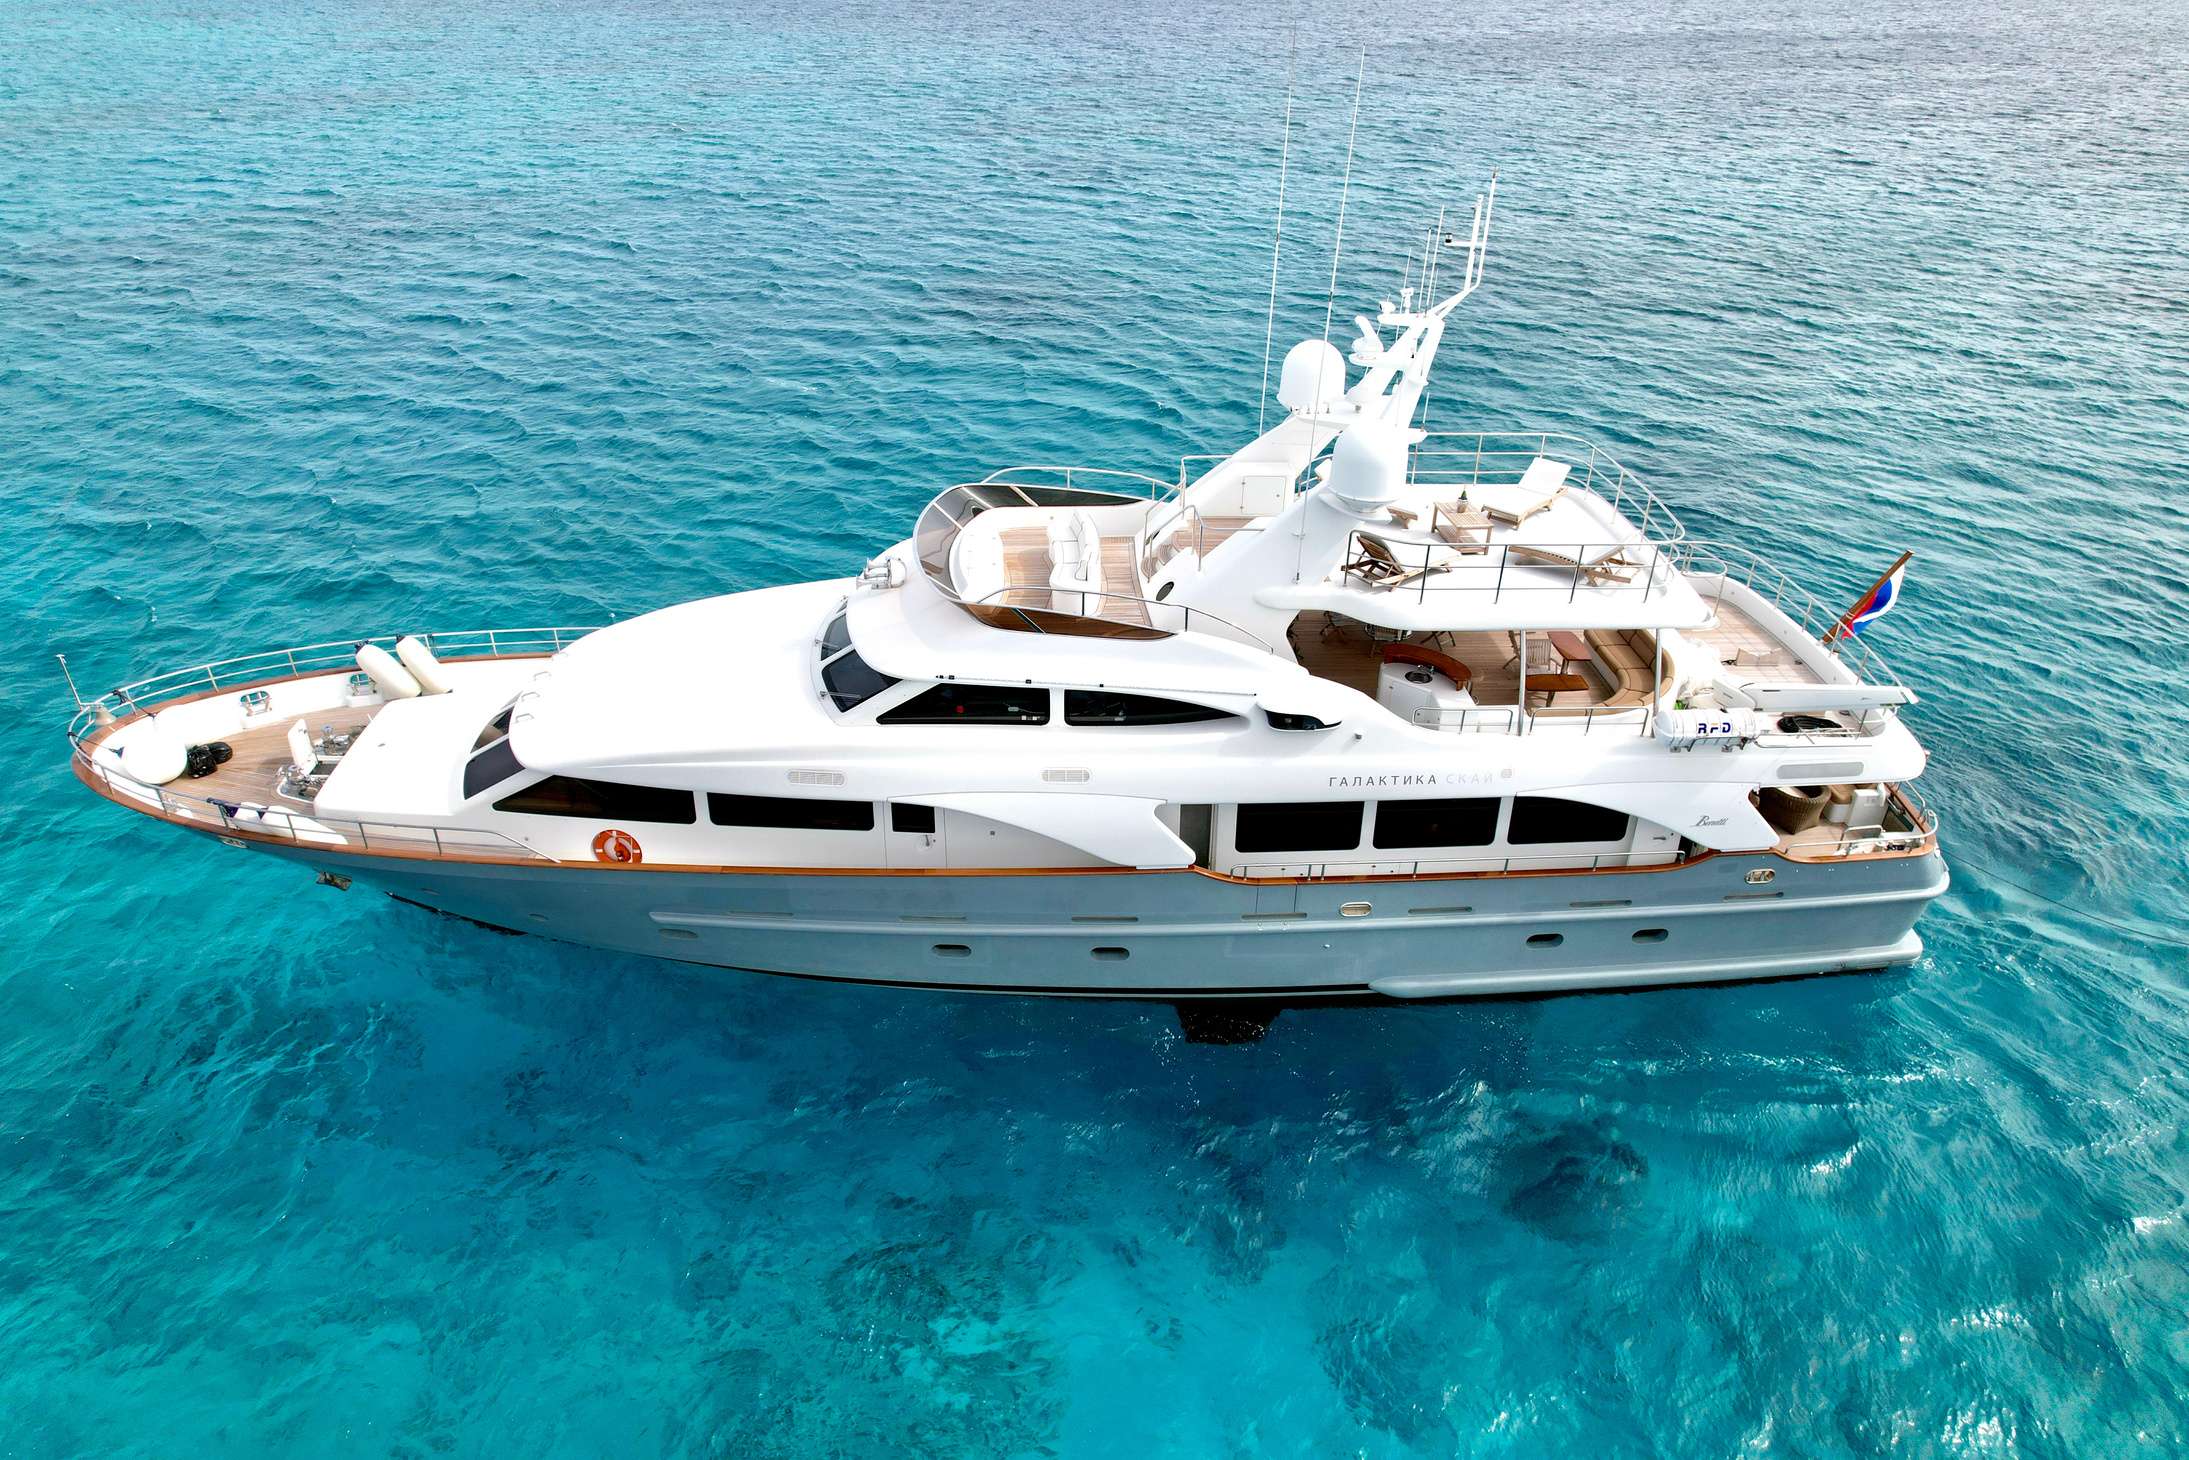 Galaktika Skay - Superyacht charter Thailand & Boat hire in Indian Ocean & SE Asia 1